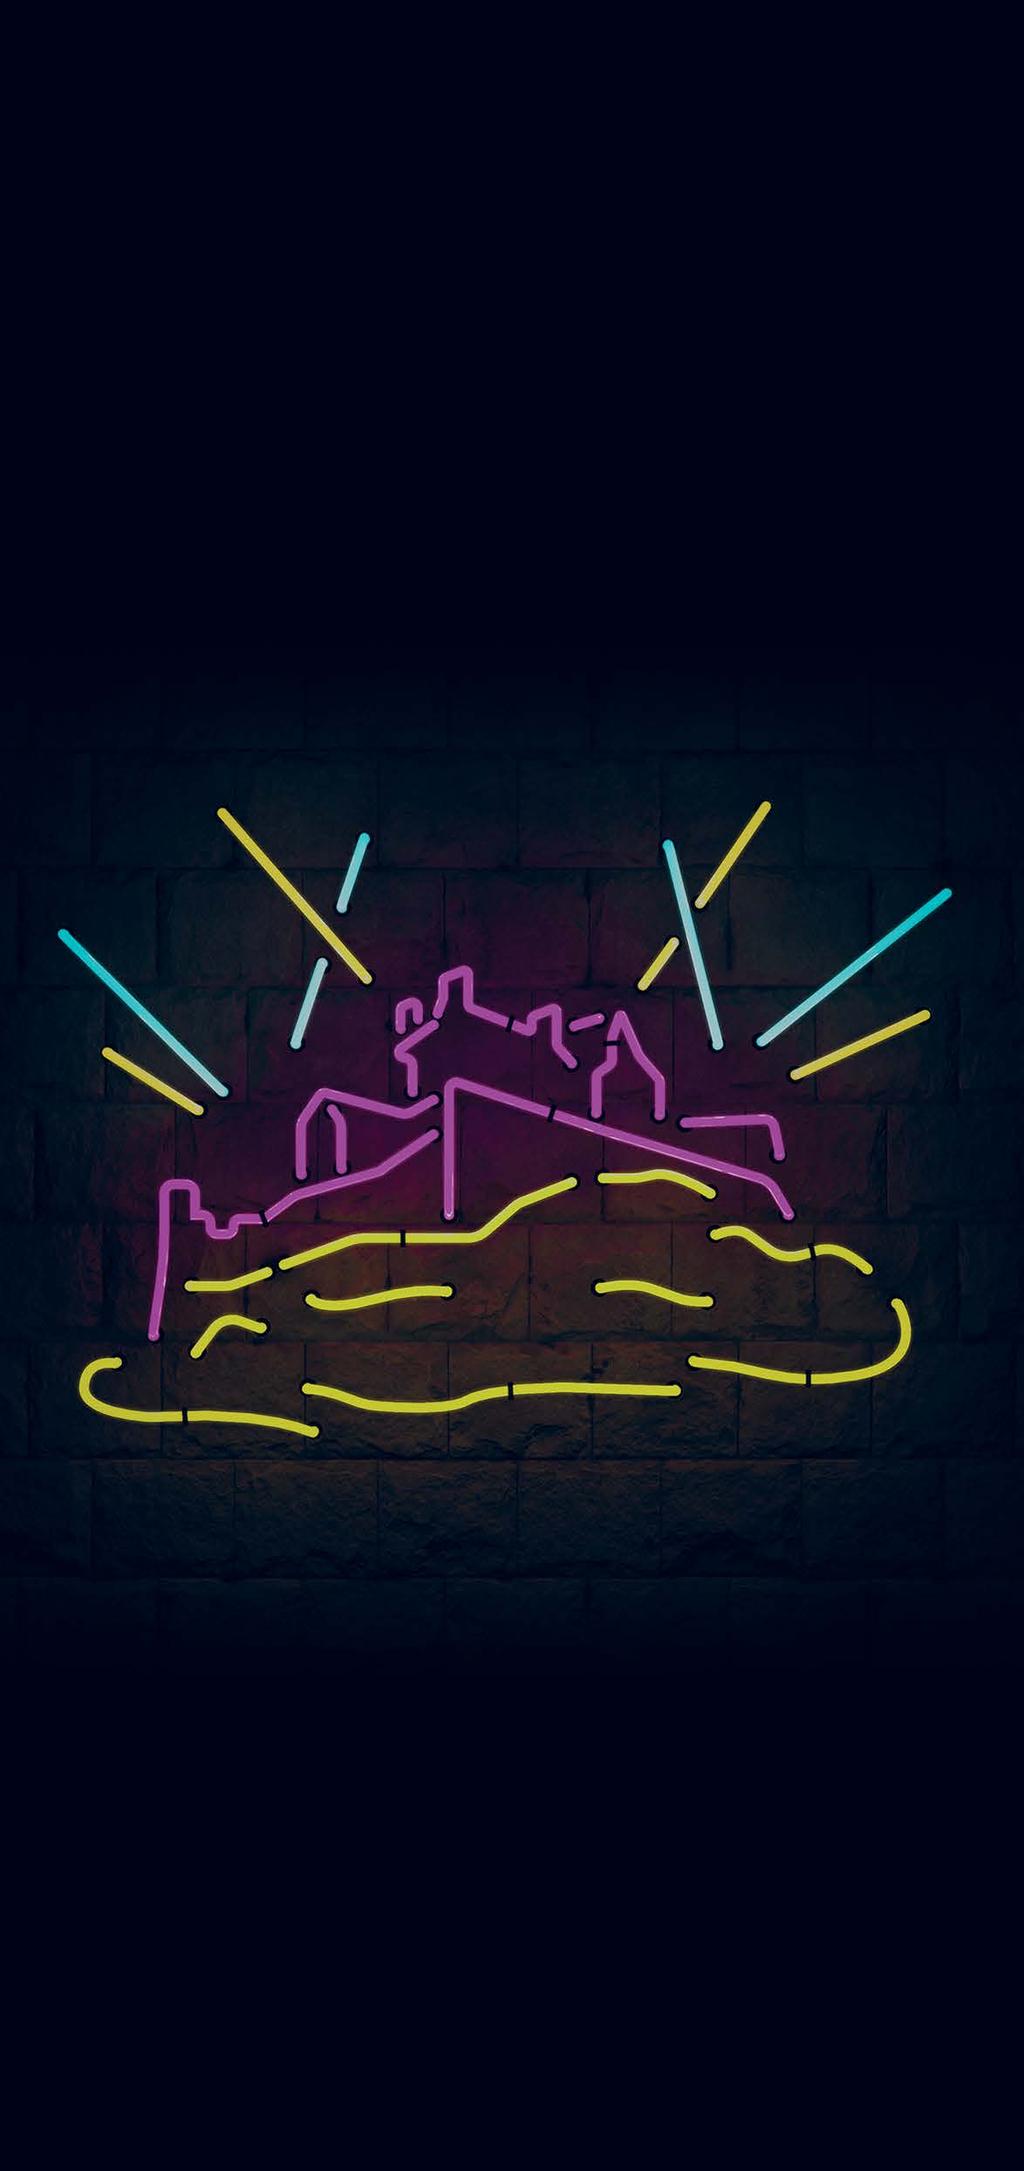 13 KNIGHT AT THE CASTLE You do NOT want to miss this! For one night only, Edinburgh Castle will transform into the hottest [k]night club in town with a carnival of music, street magic and spoken word.